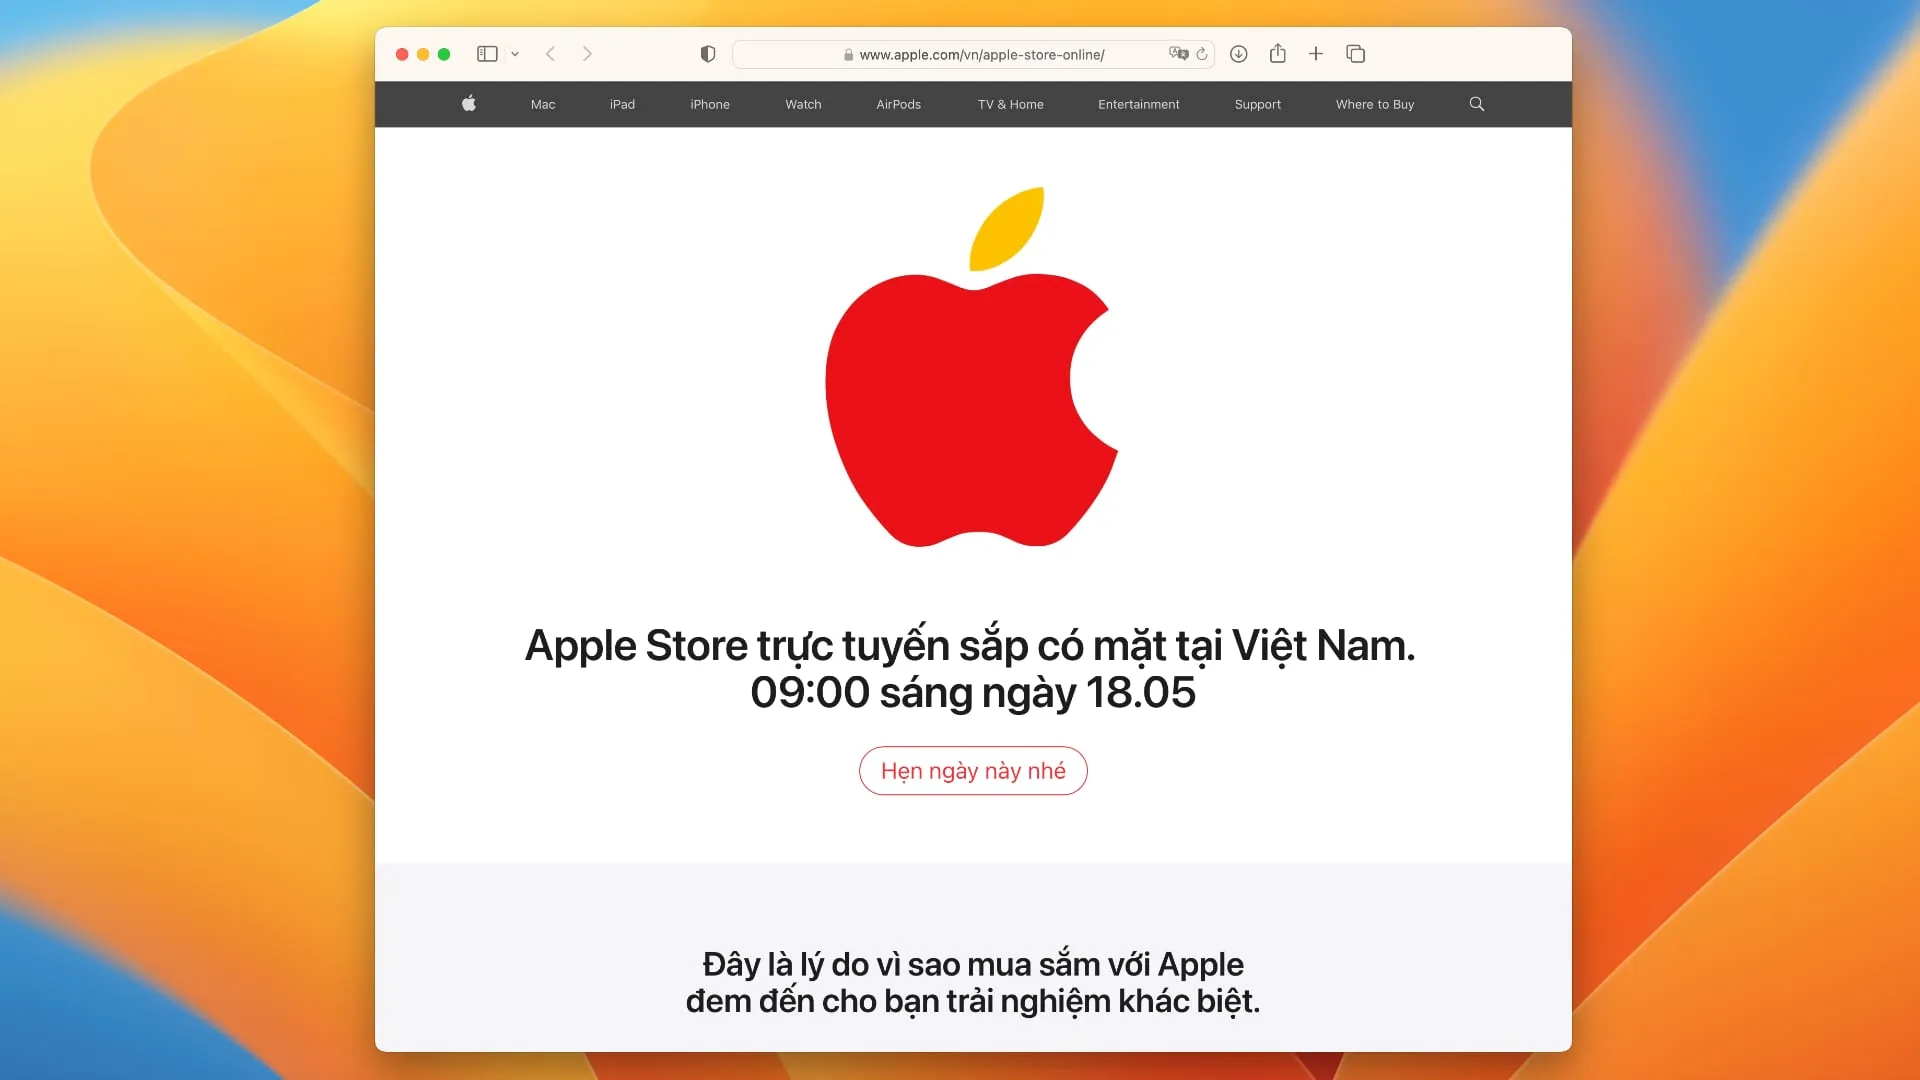 Apple's preview page announcing the online store in Vietnam